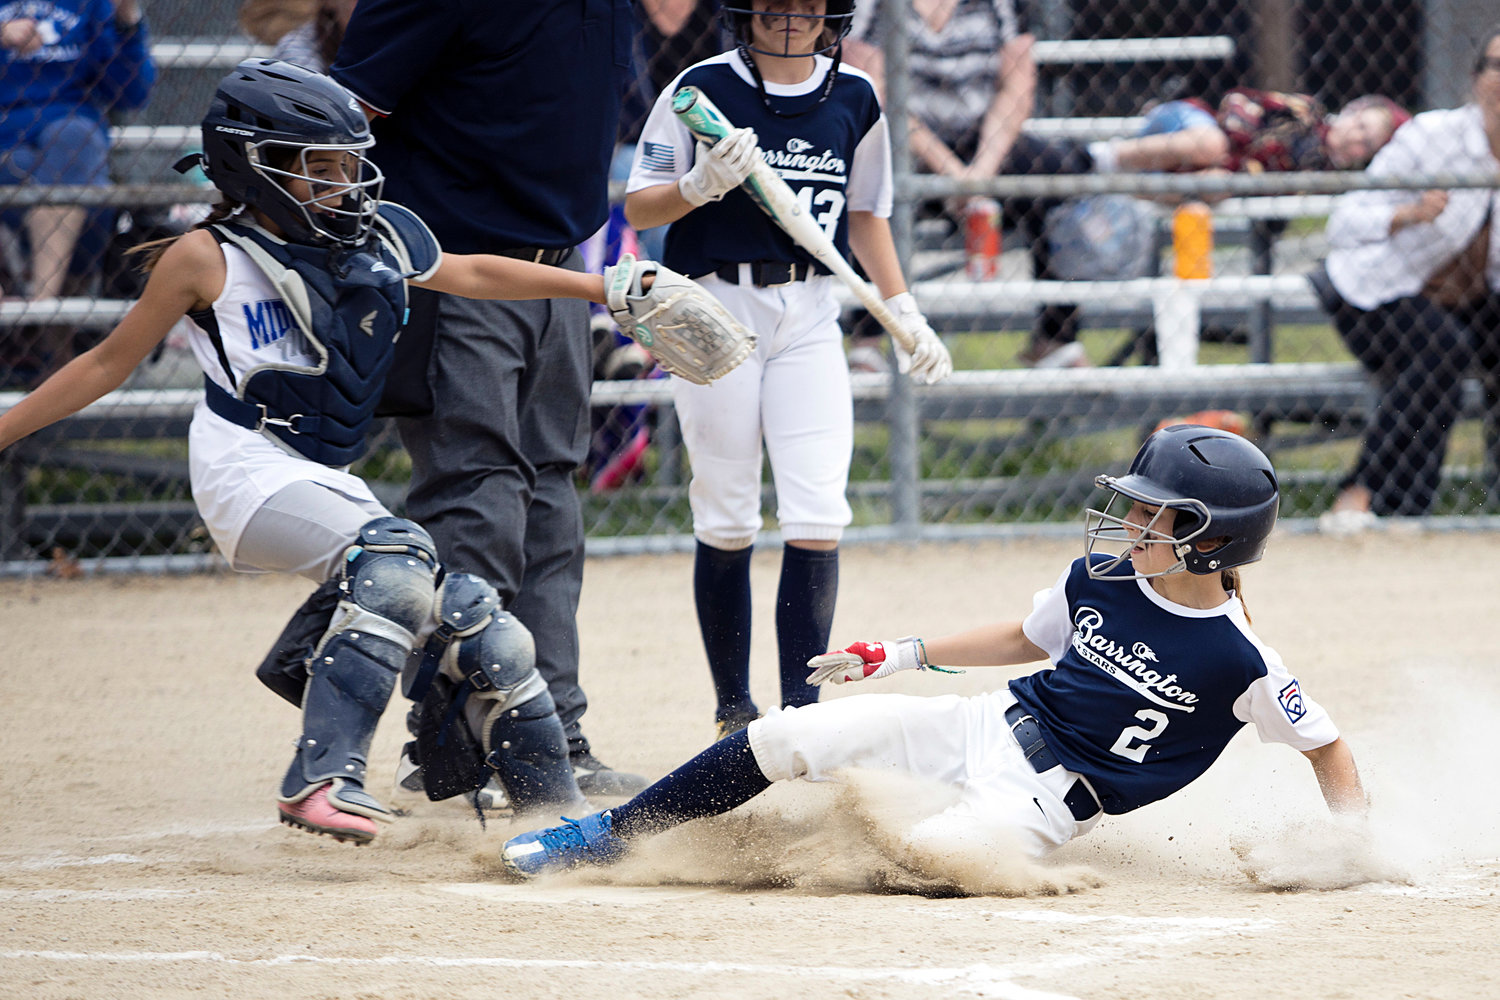 Angie Promades slides safely into home plate during the second inning of Tuesday's playoff game, against Middletown.